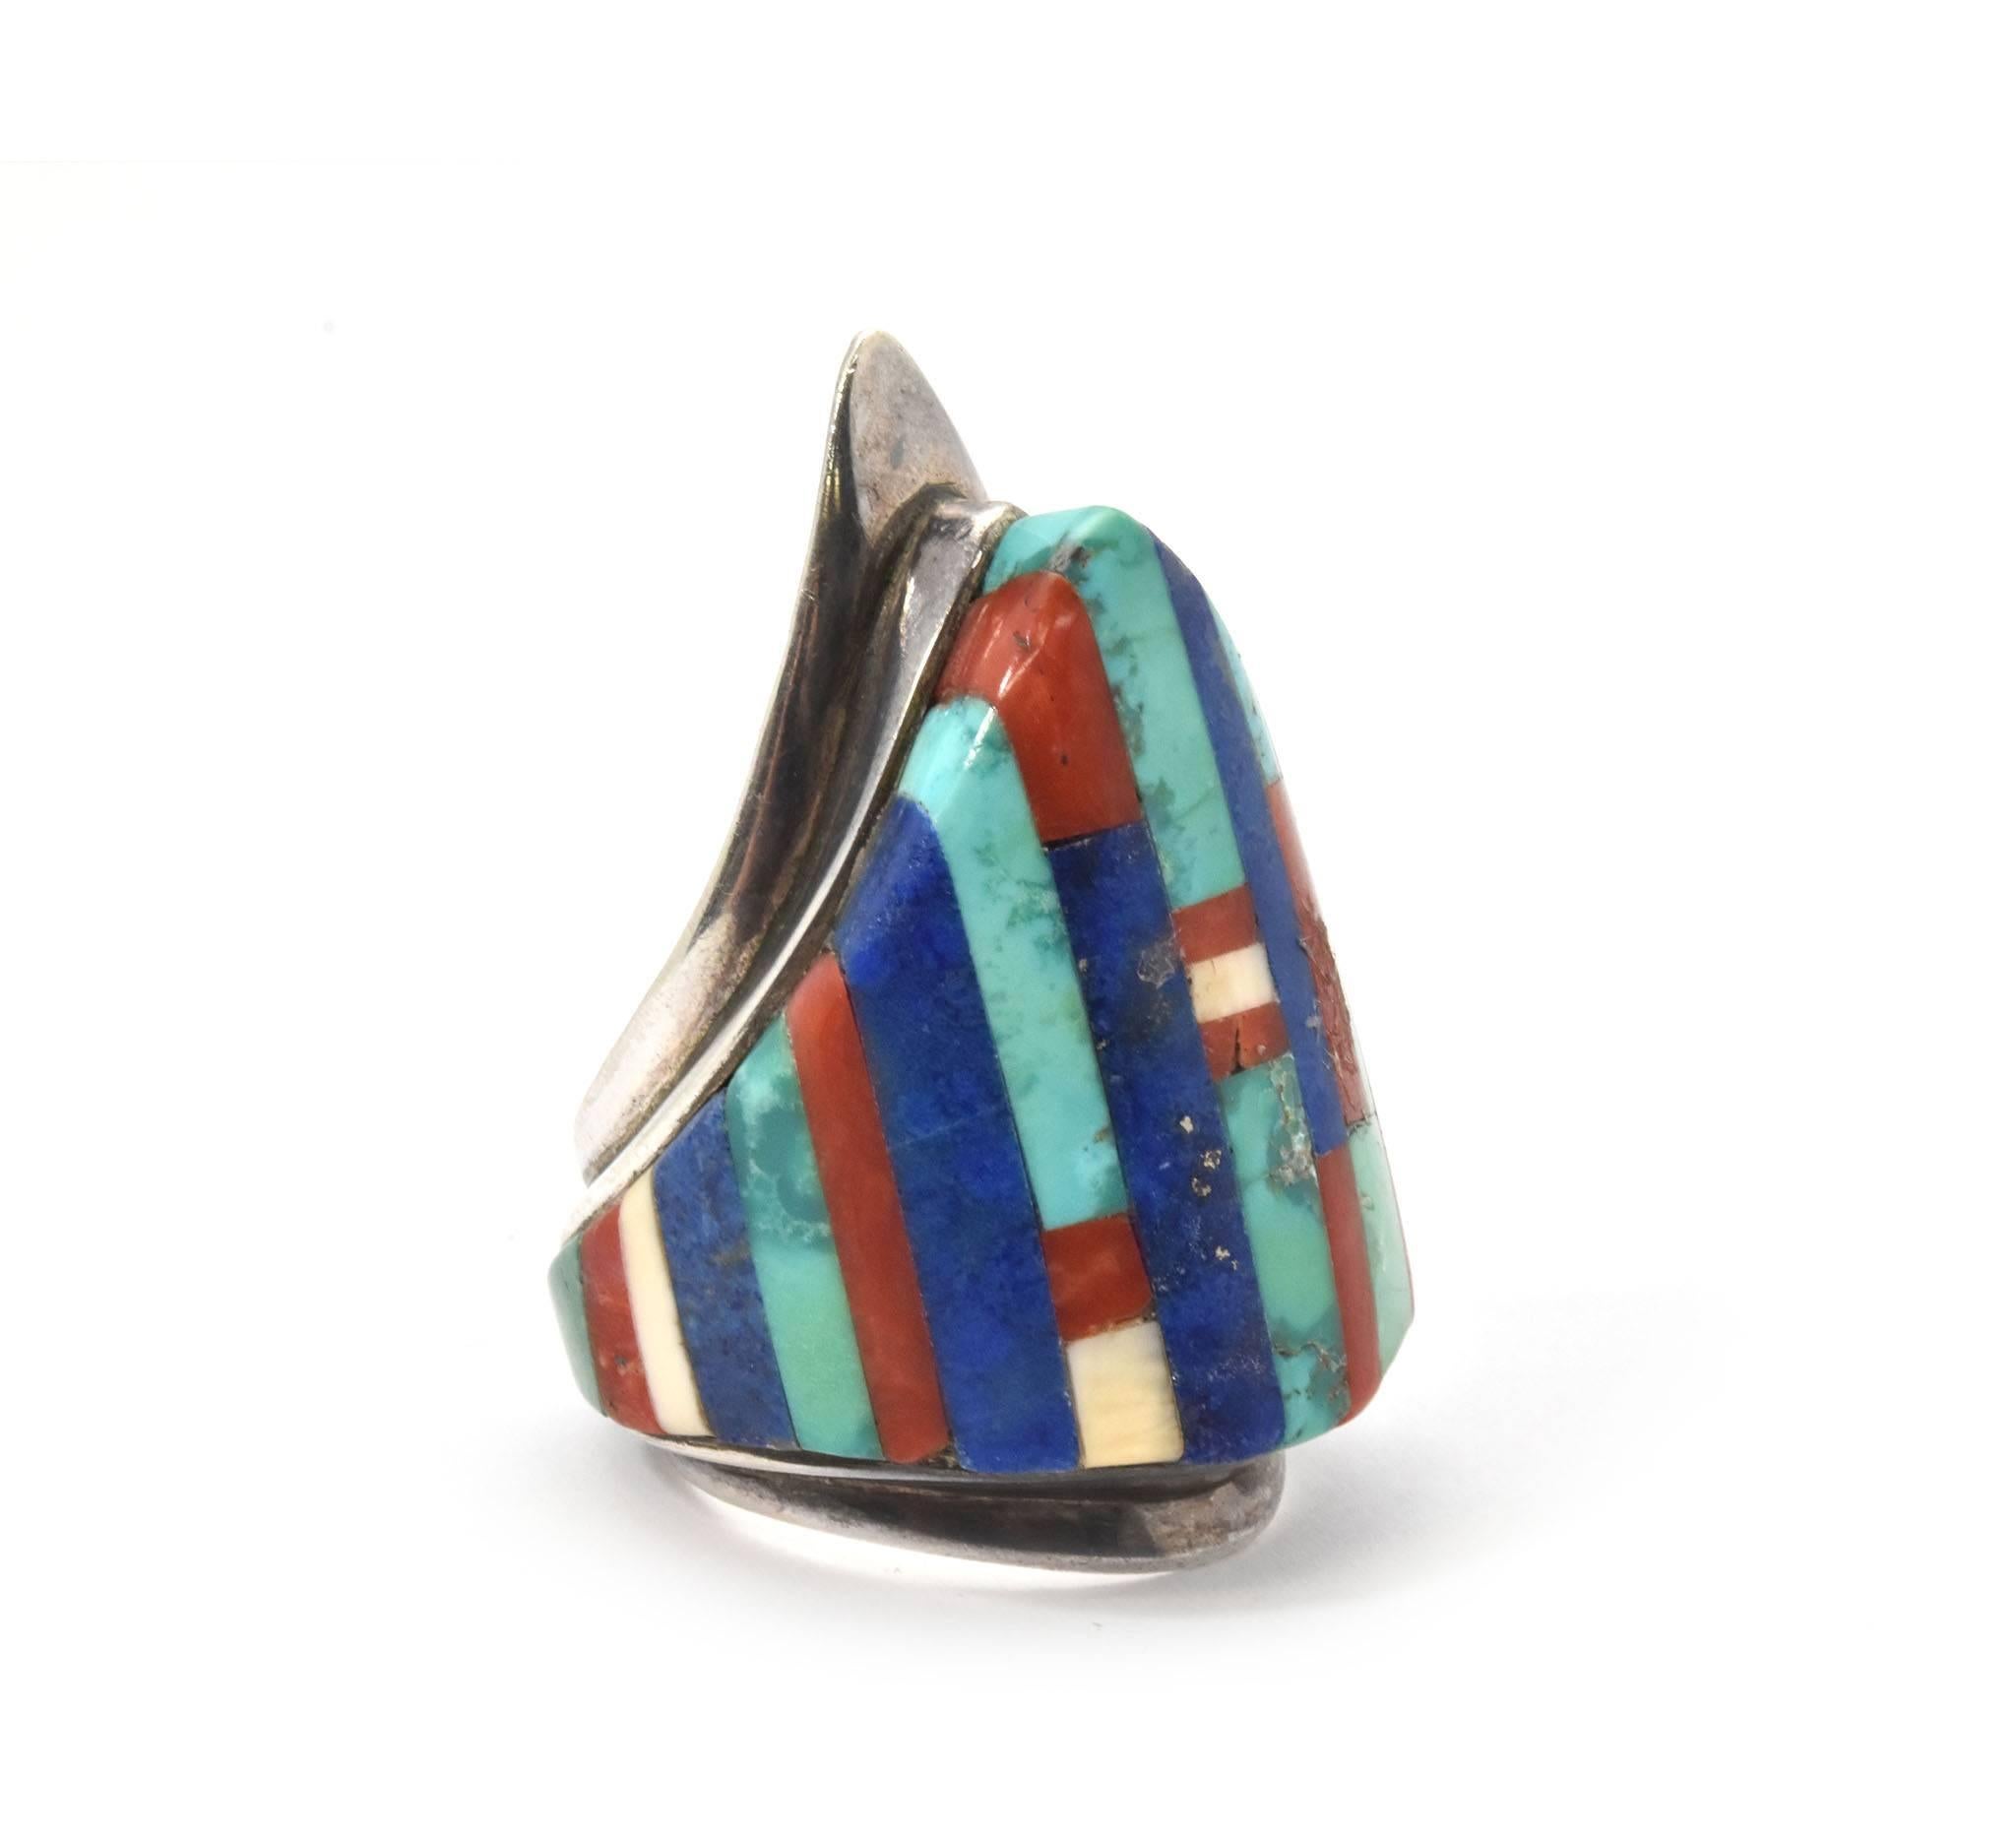 Designer: “Charles Loloma”
Material: sterling silver
Inlays: turquoise, lapis lazuli and coral
Dimensions: 1.75 inches tall and 1 inch wide
Ring size: 9
Hallmarks: “Charles Loloma”
Weight: 26.53 grams
